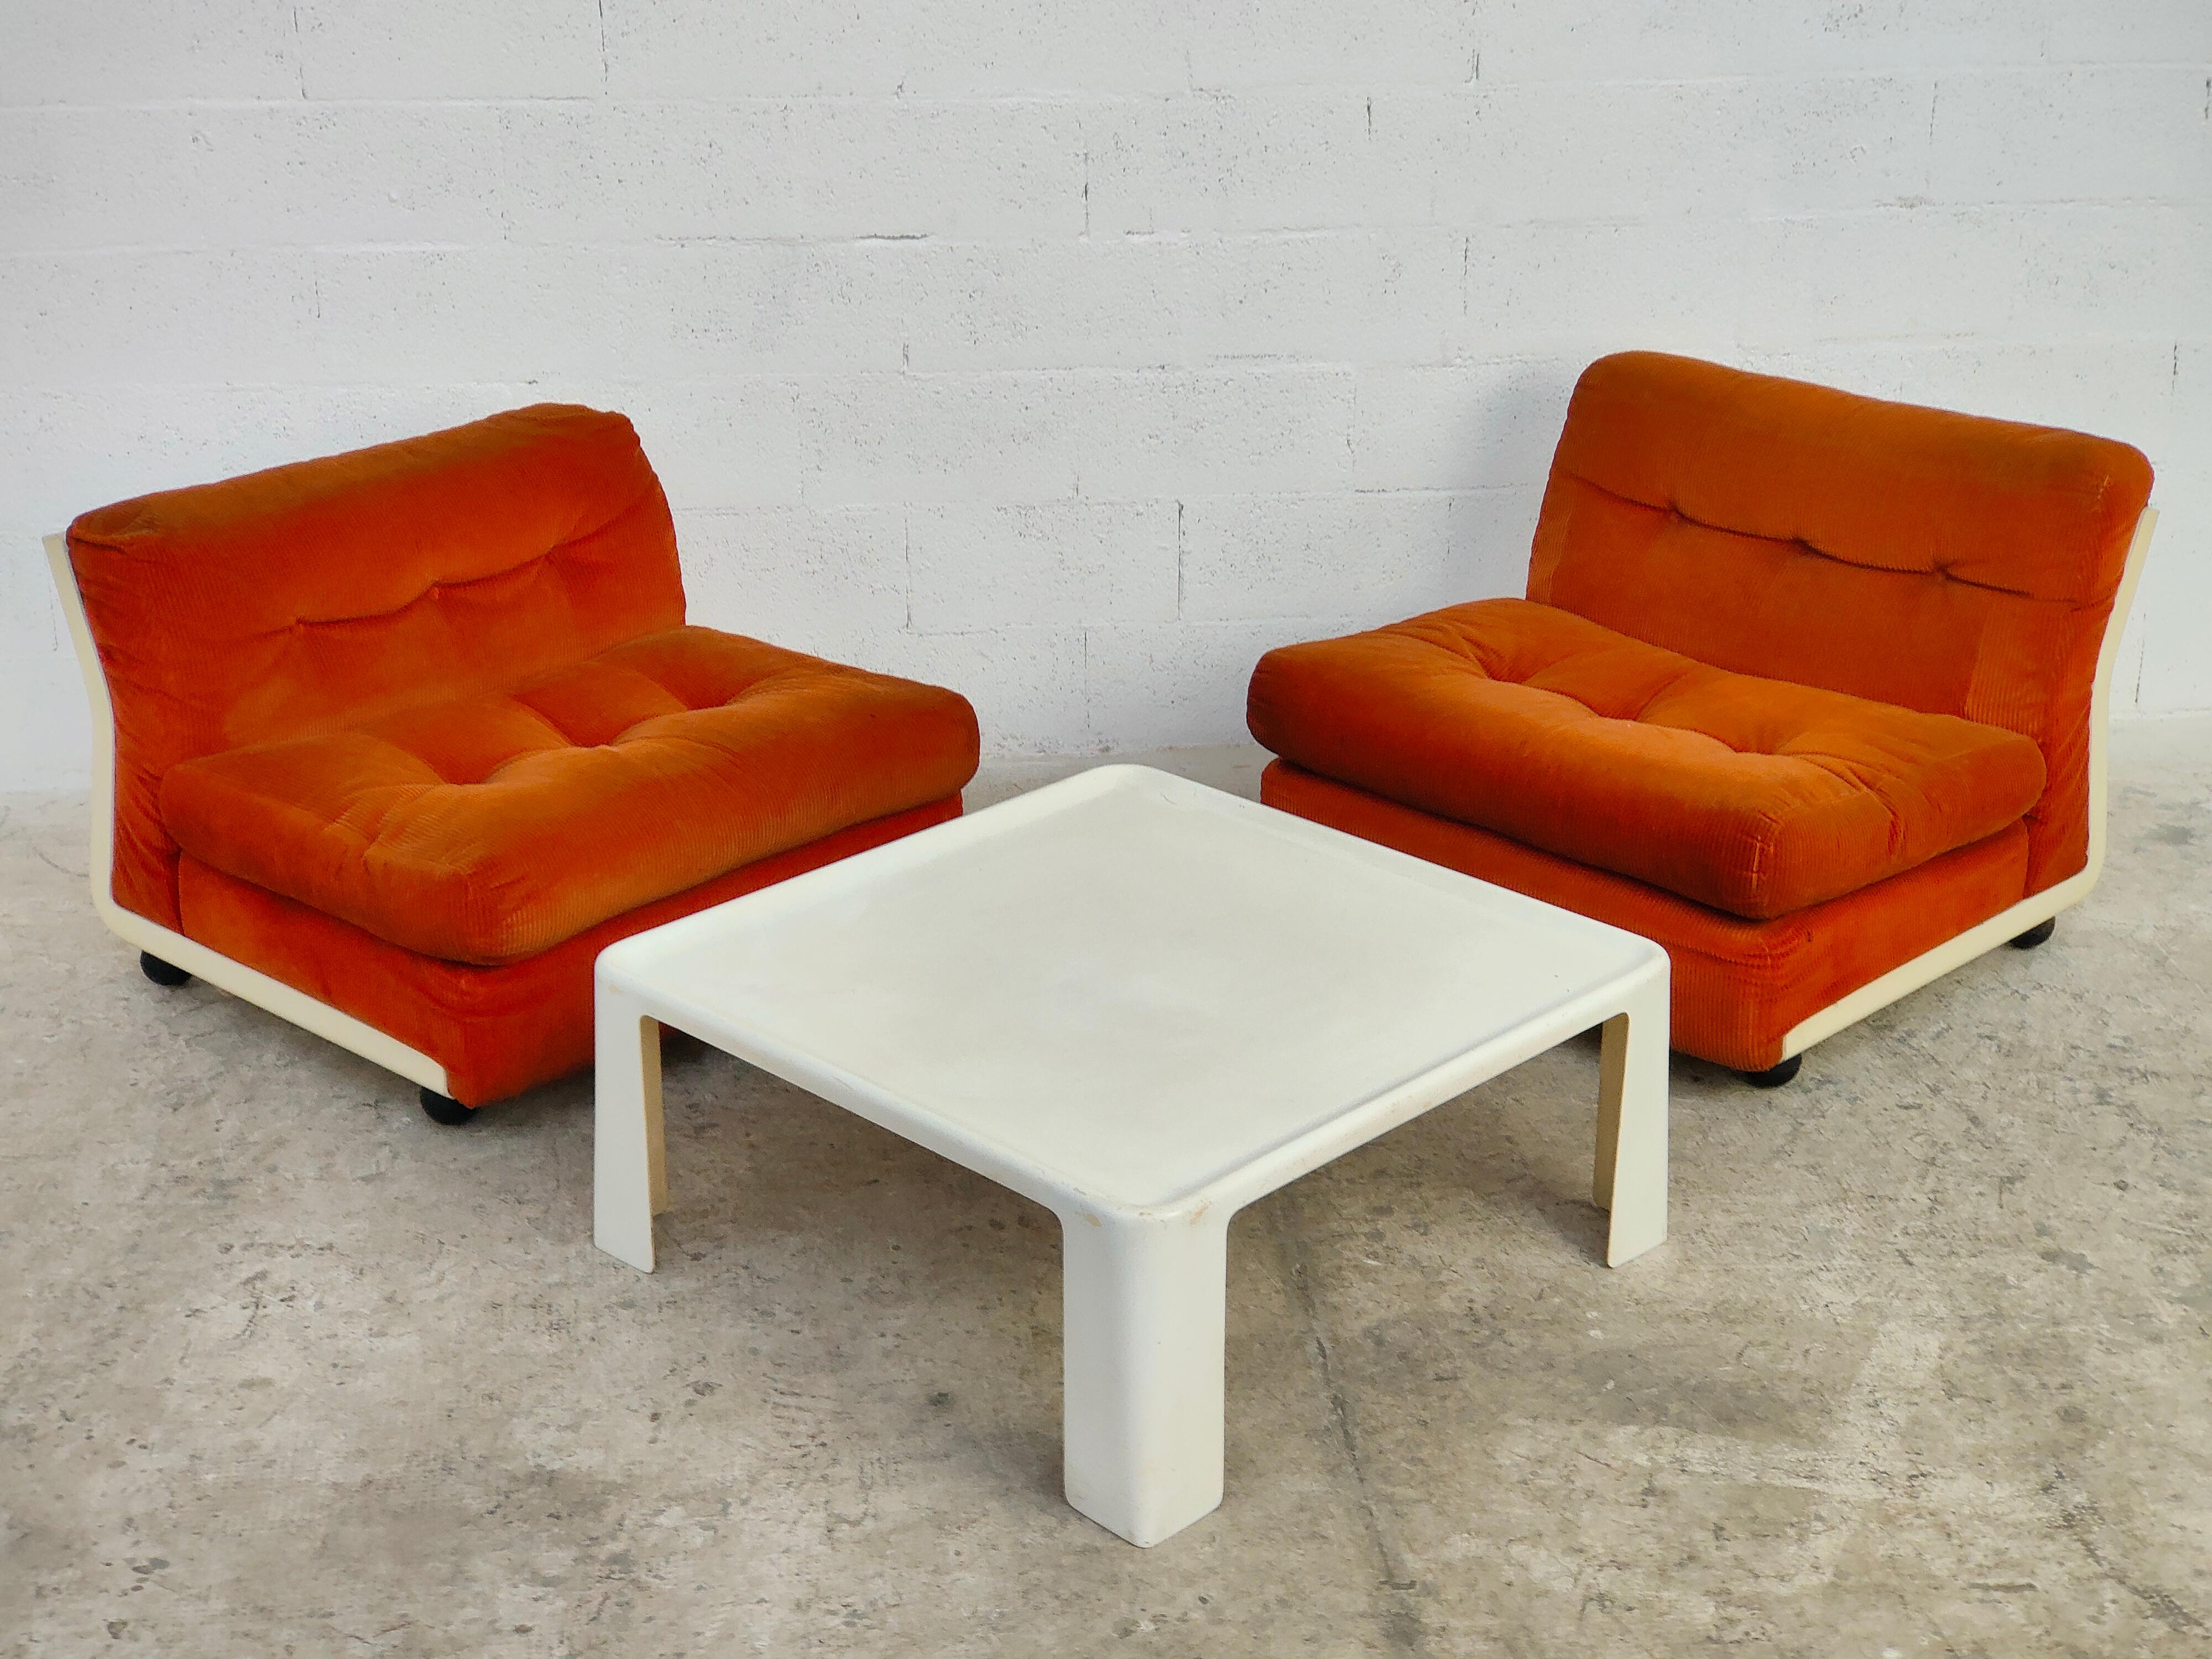 Stunning living room set Amanta composed of 2 lounge chairs and a low table, designed by Mario Bellini and produced by B&B Italia 1970s.
The 